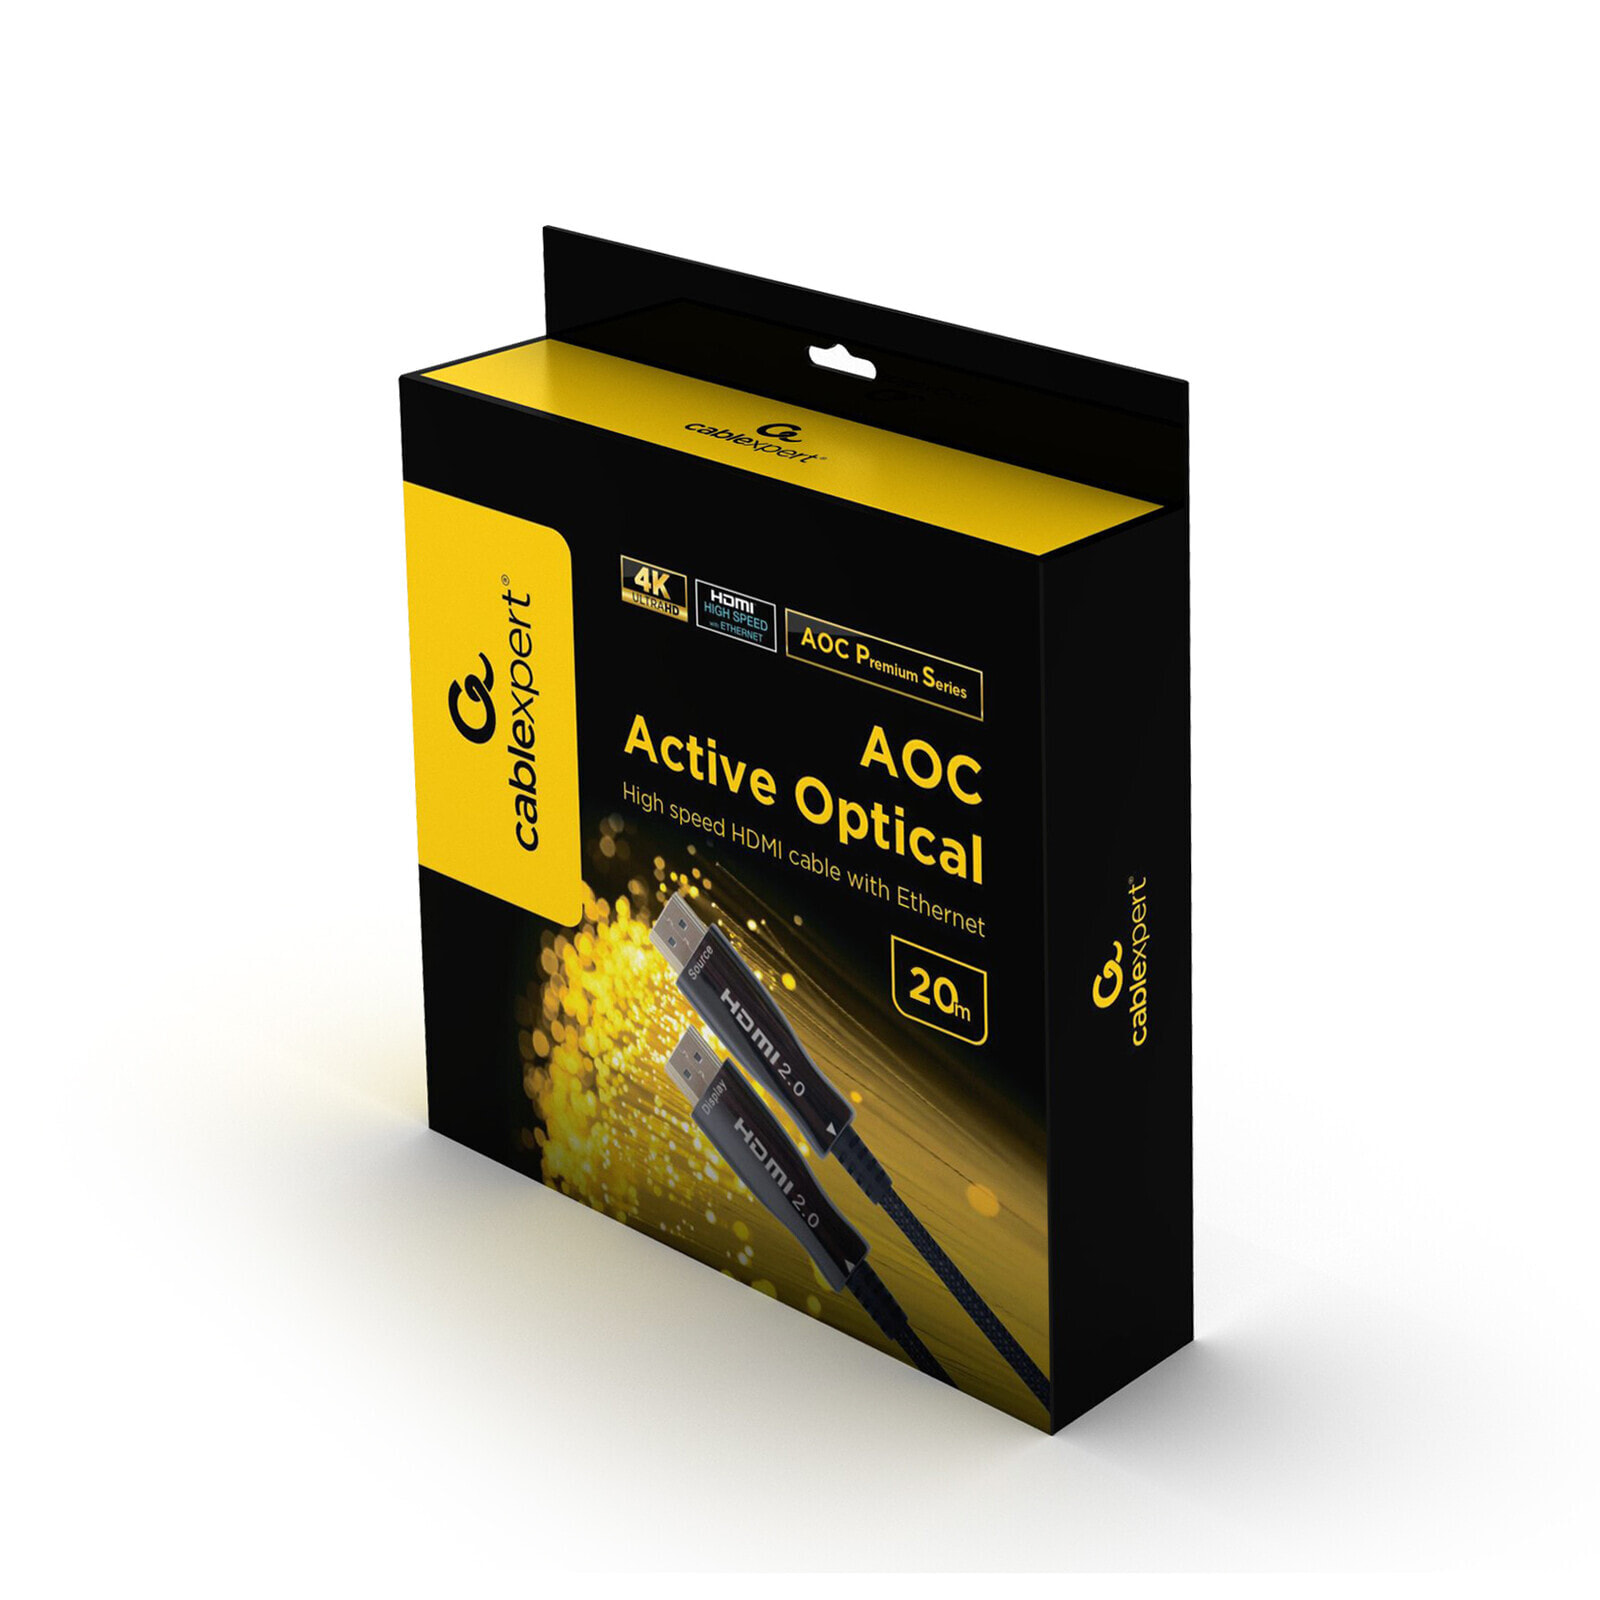 AOC High speed HDMI D-A cable with Ethernet AOC Premium Series 20m